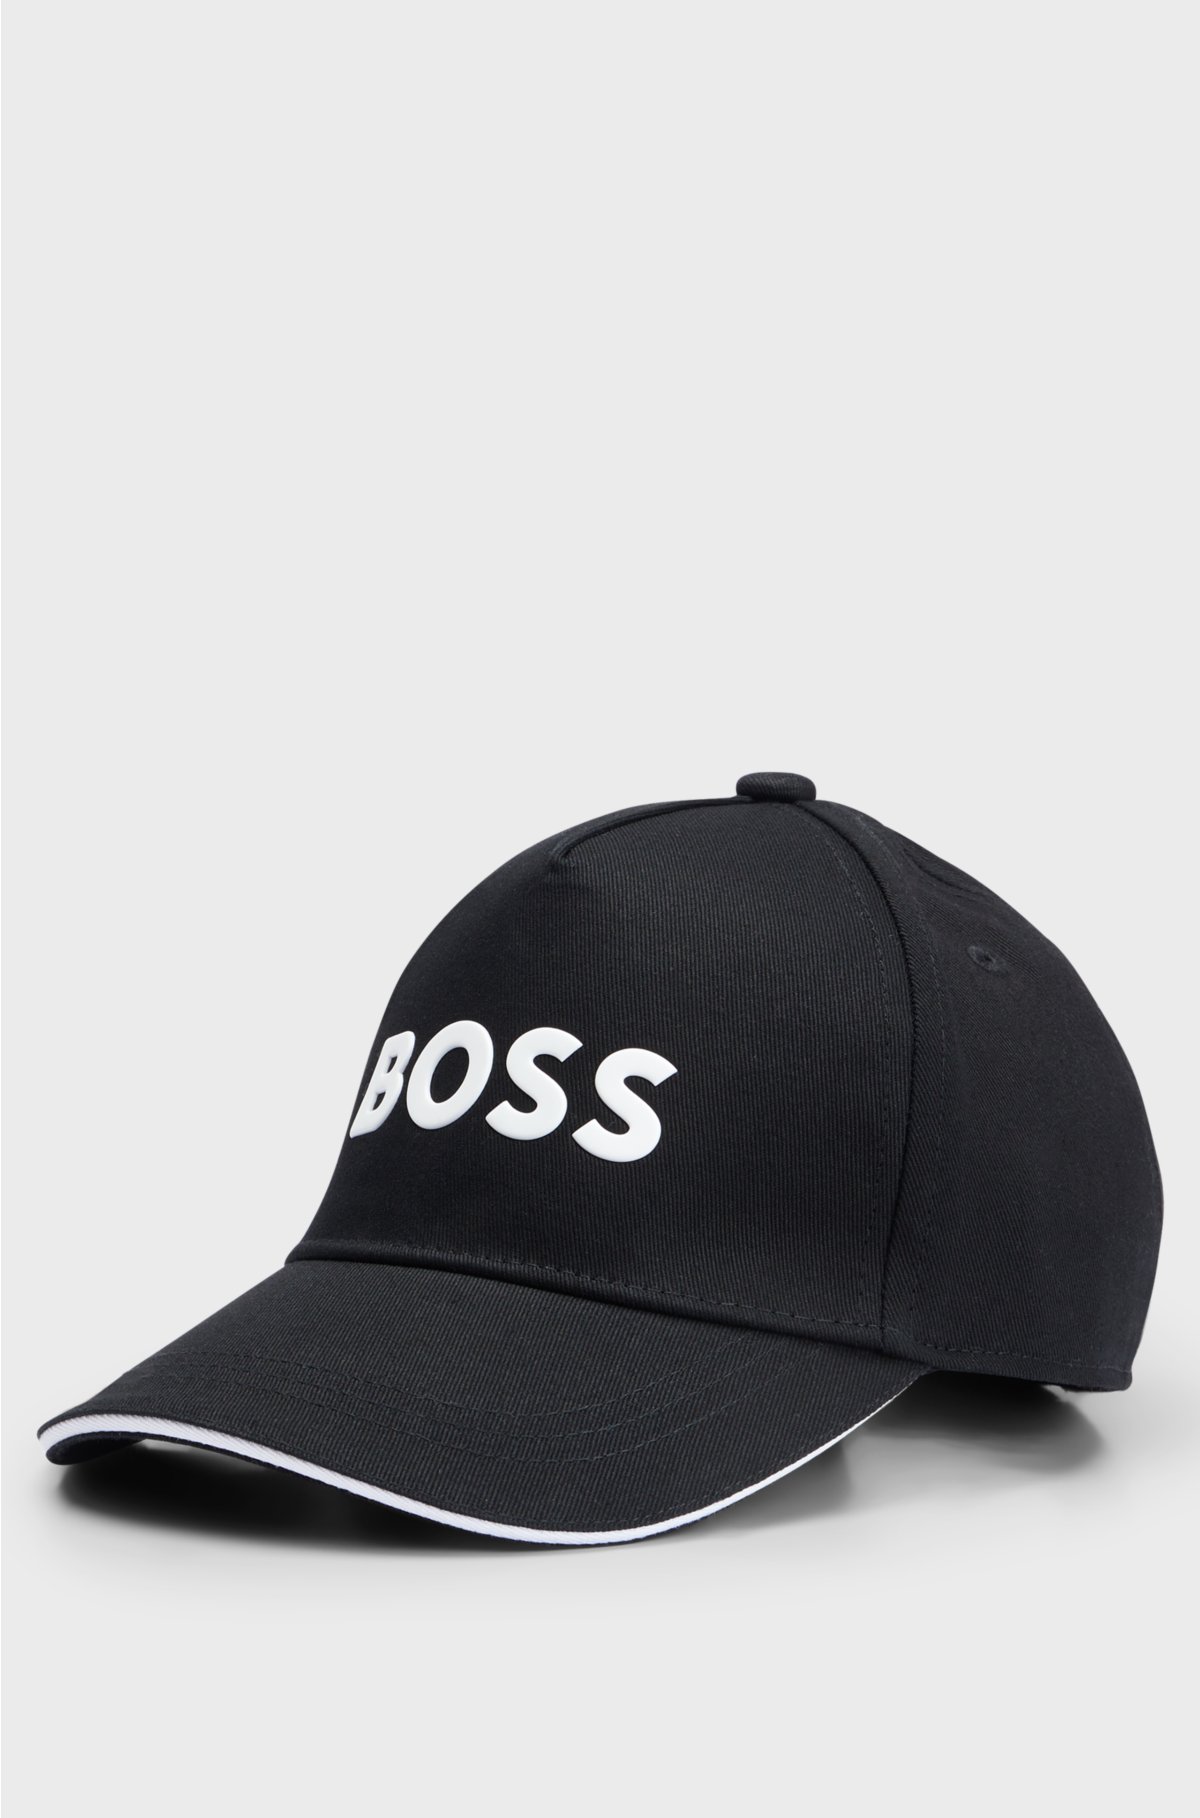 Kids' cap in cotton twill with contrast logo, Black